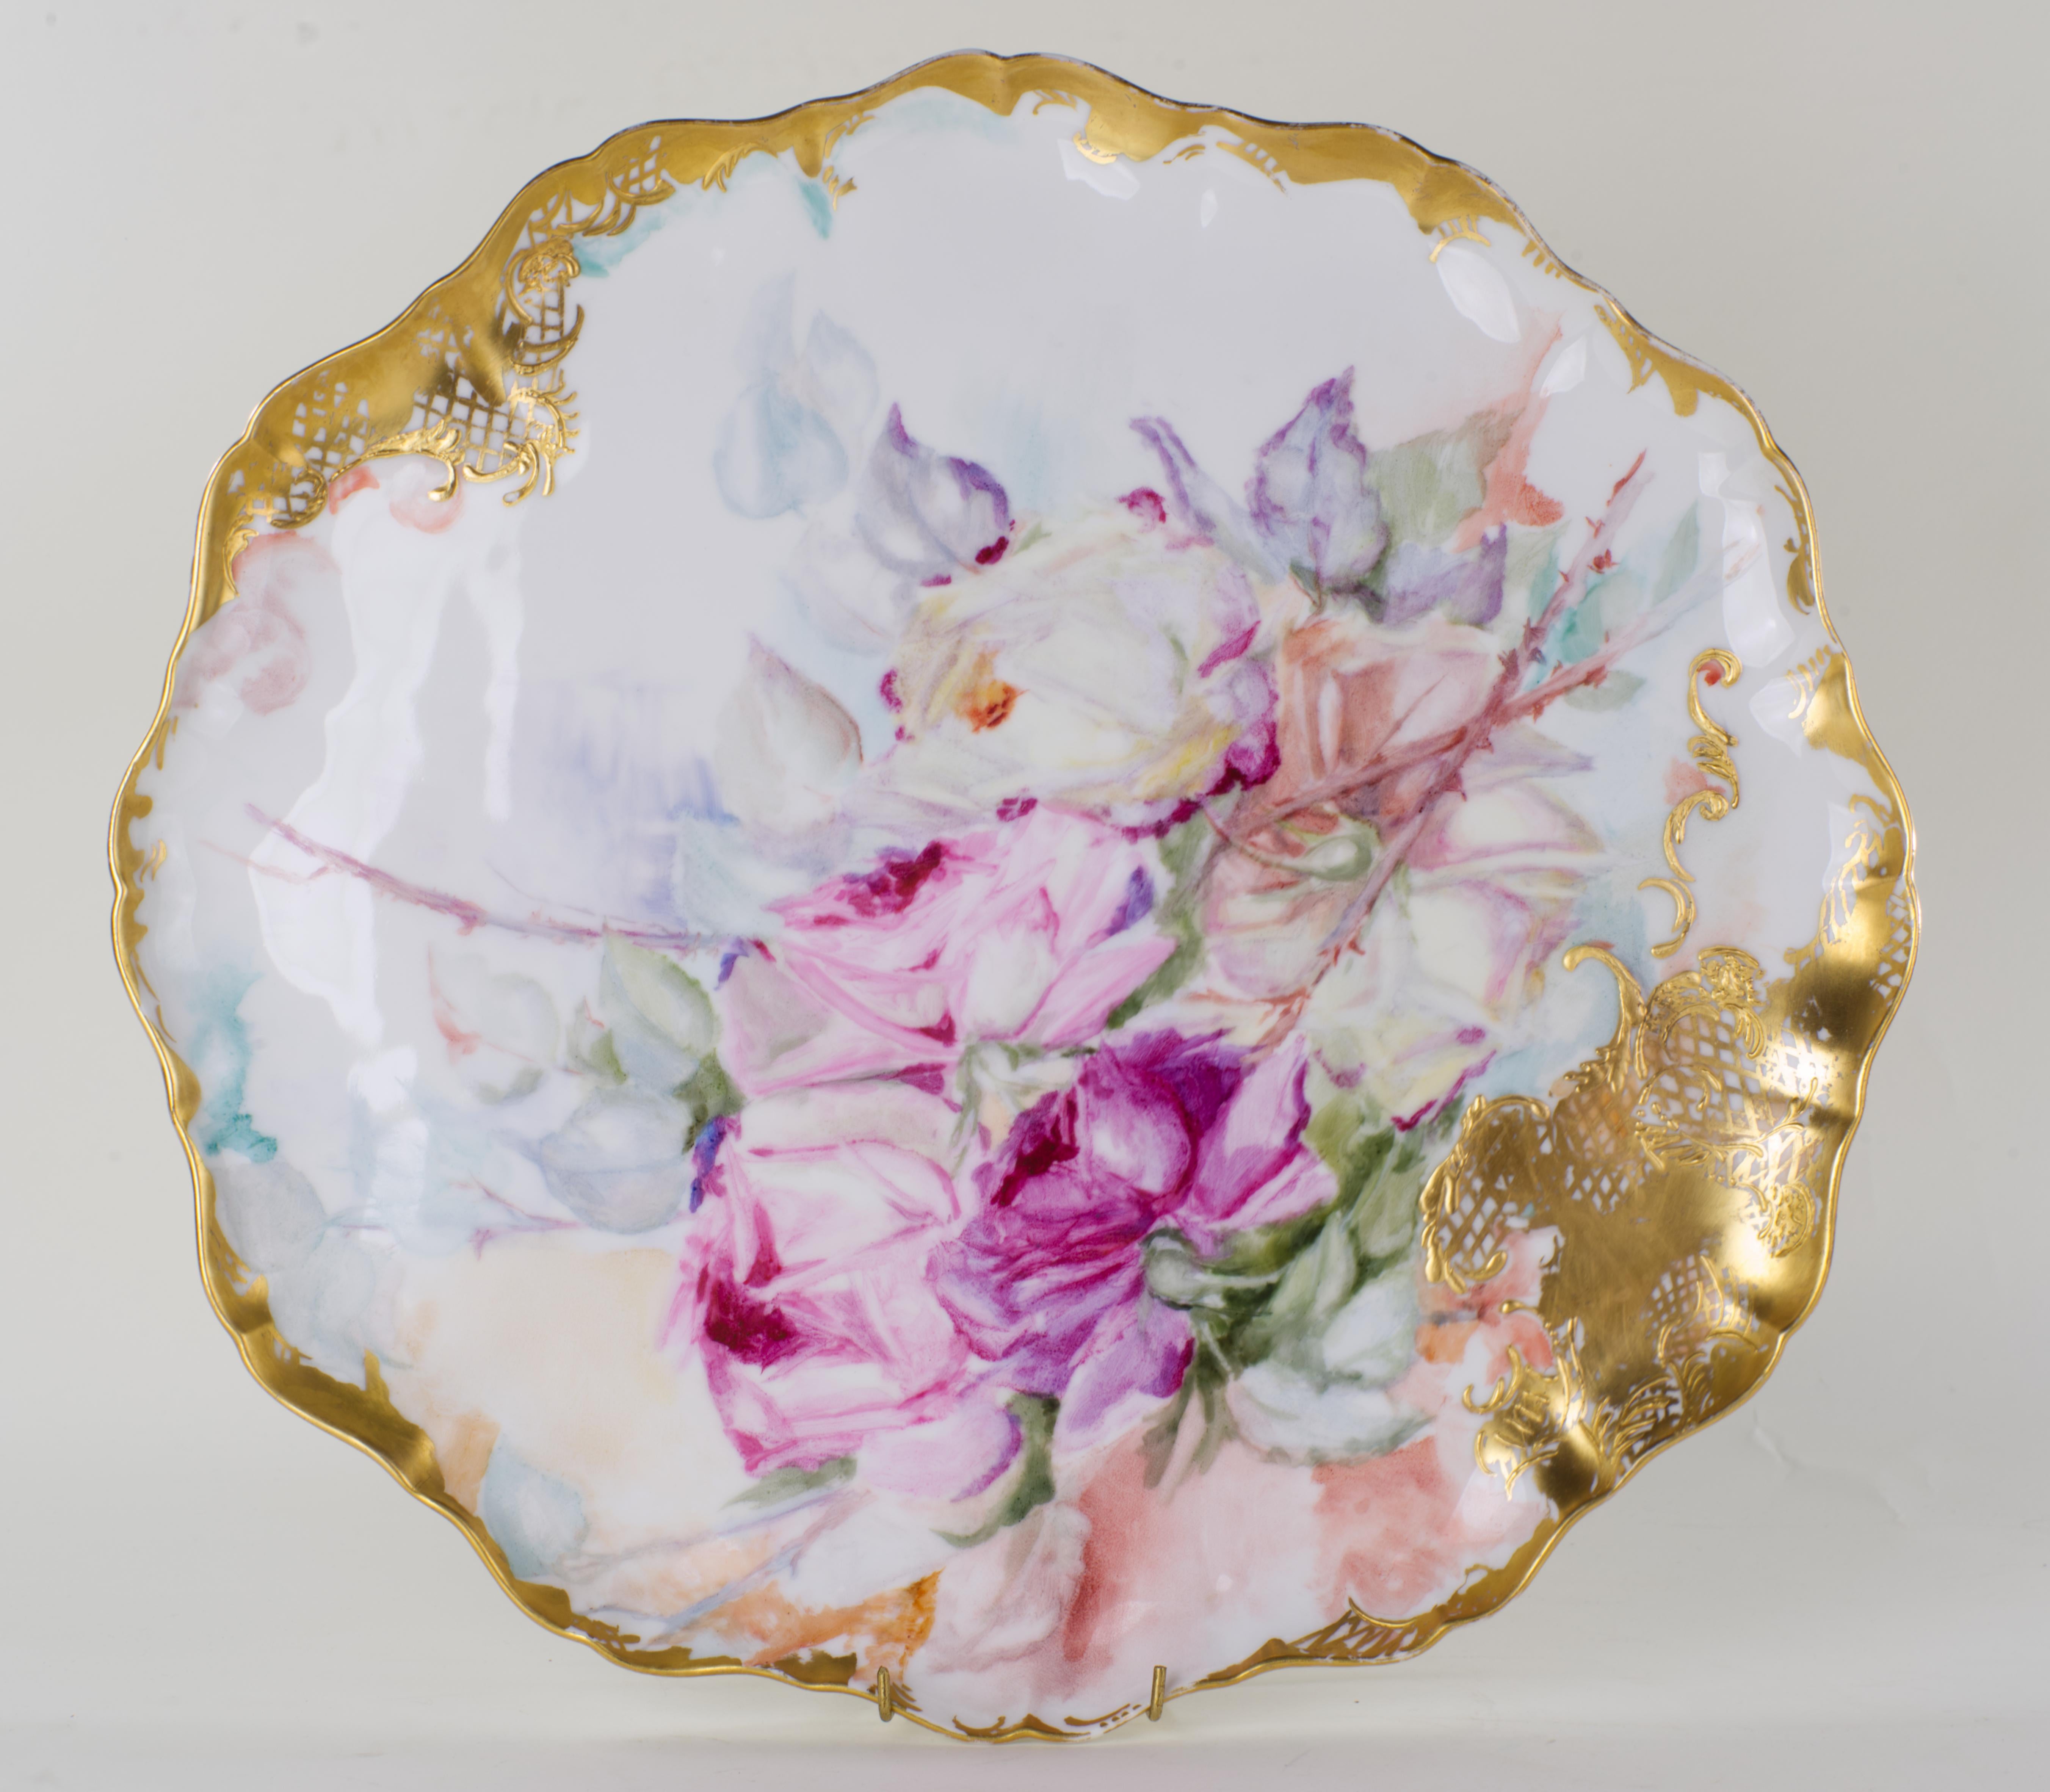 Large oval porcelain tray is hand painted with bouquet of roses in different shades of pink and decorated with asymmetrical gilded trim. The tray has unglazed bisque bottom; low wavy rim flows around the tray, creating a graceful, delicate shape.